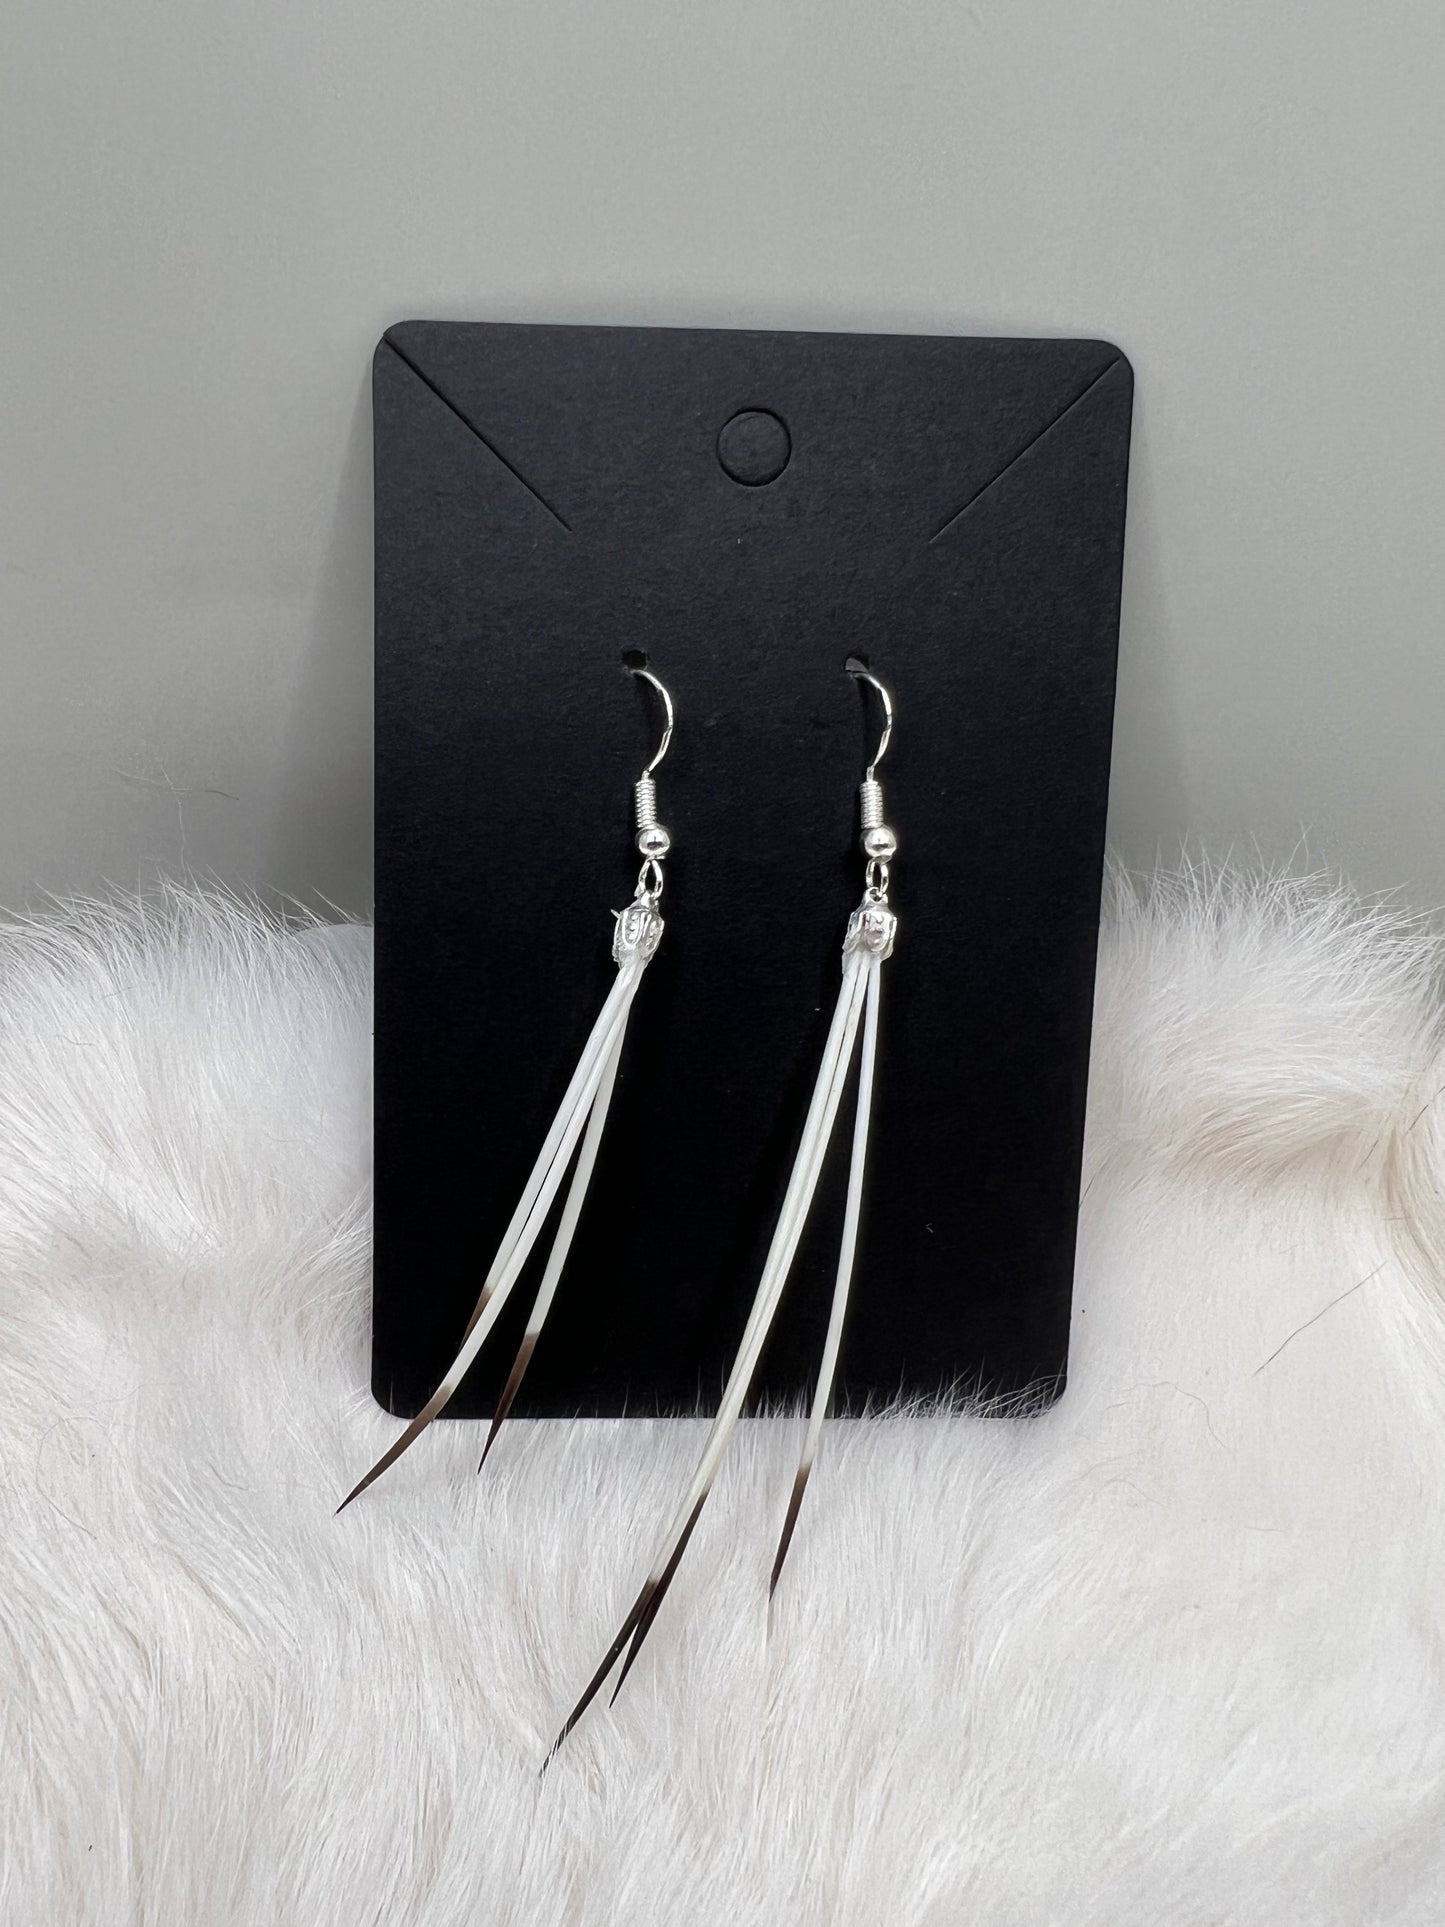 N. American Porcupine Quill Earrings - Silver